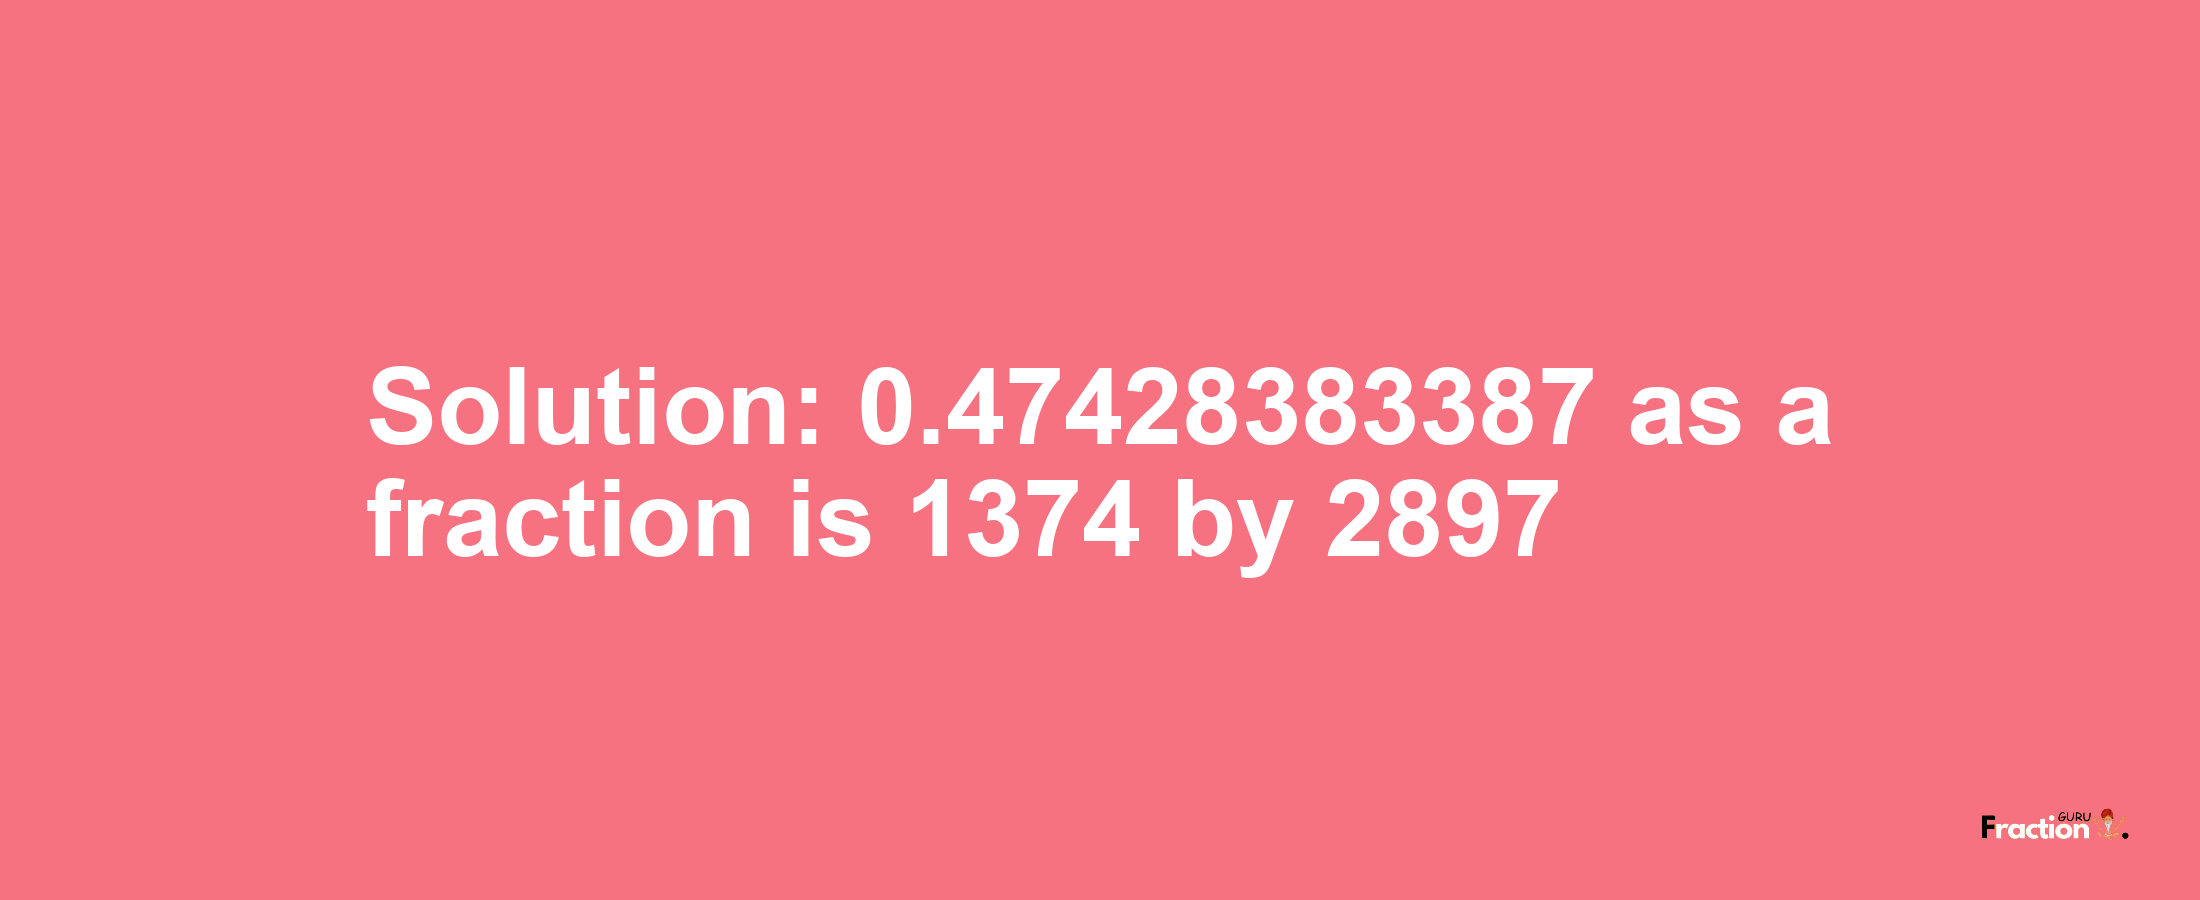 Solution:0.47428383387 as a fraction is 1374/2897